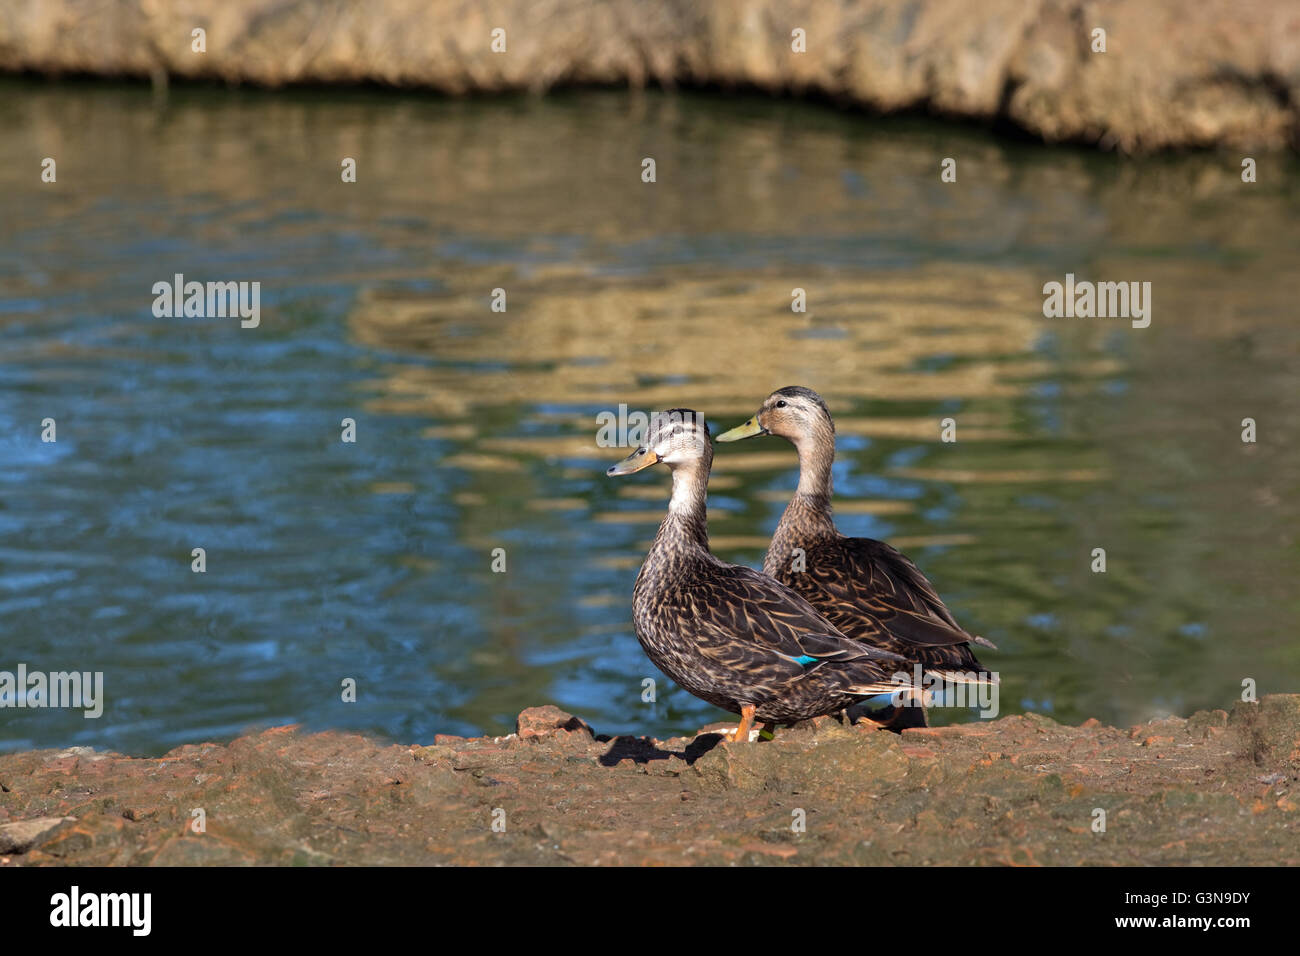 North American Black Duck (Anas rubripes). Pair, male or drake, right. Note difference of bill colour between sexes. Stock Photo